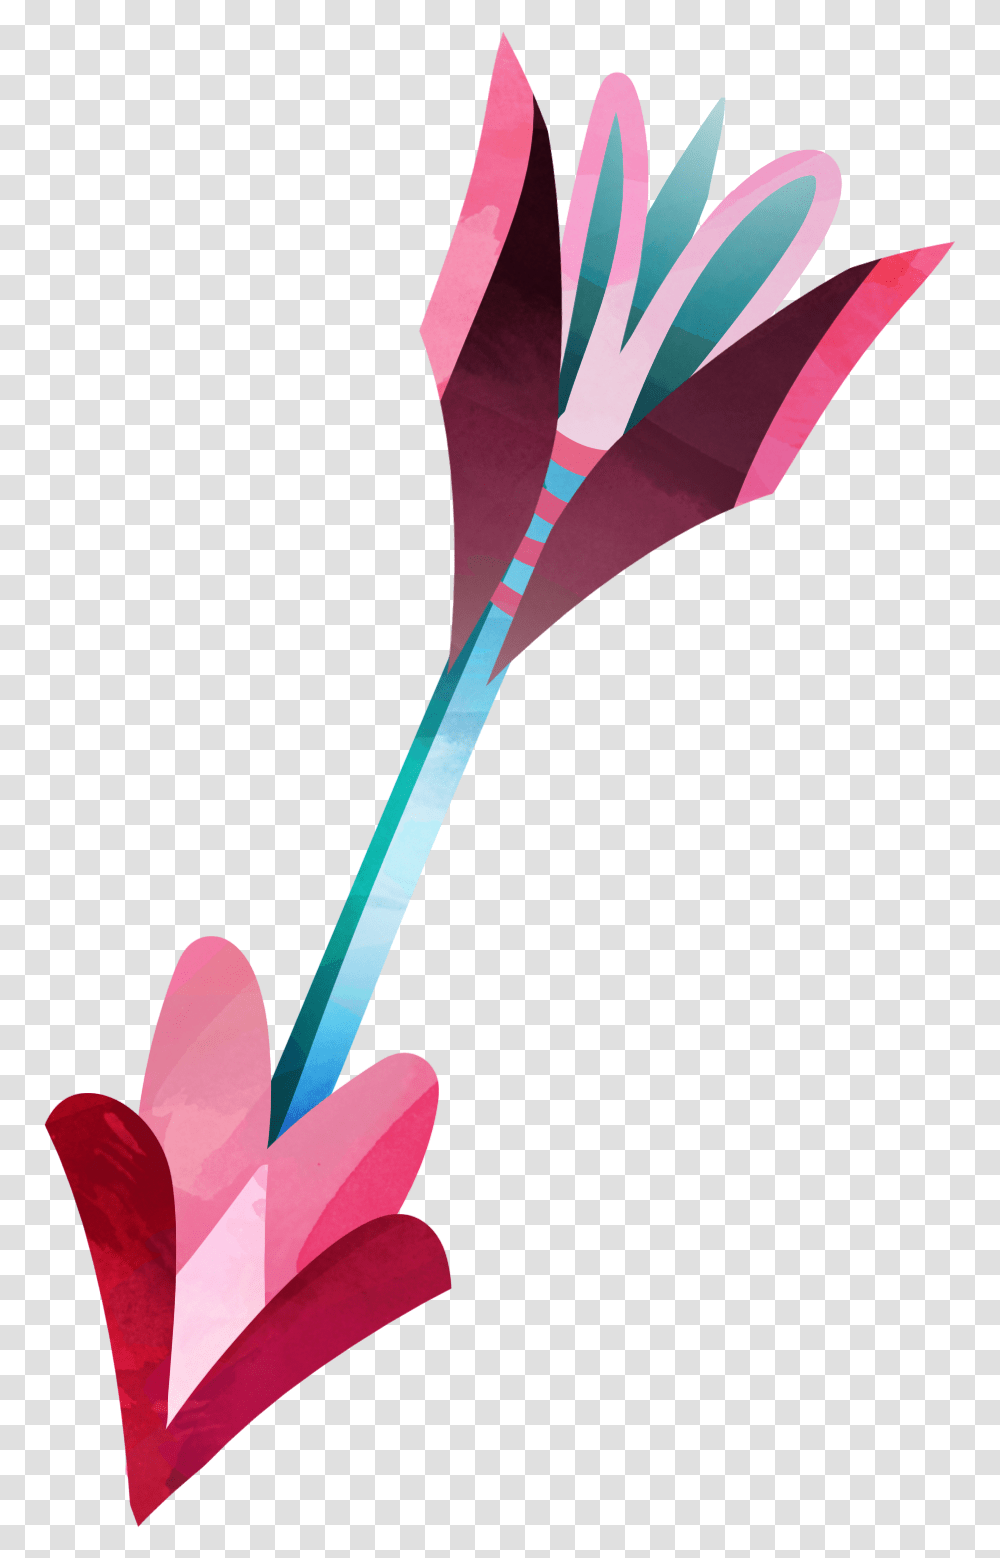 Three Dimensional Bow And Arrow Watercolor Cartoon Lawn Darts, Plant, Flower, Blossom, Scissors Transparent Png